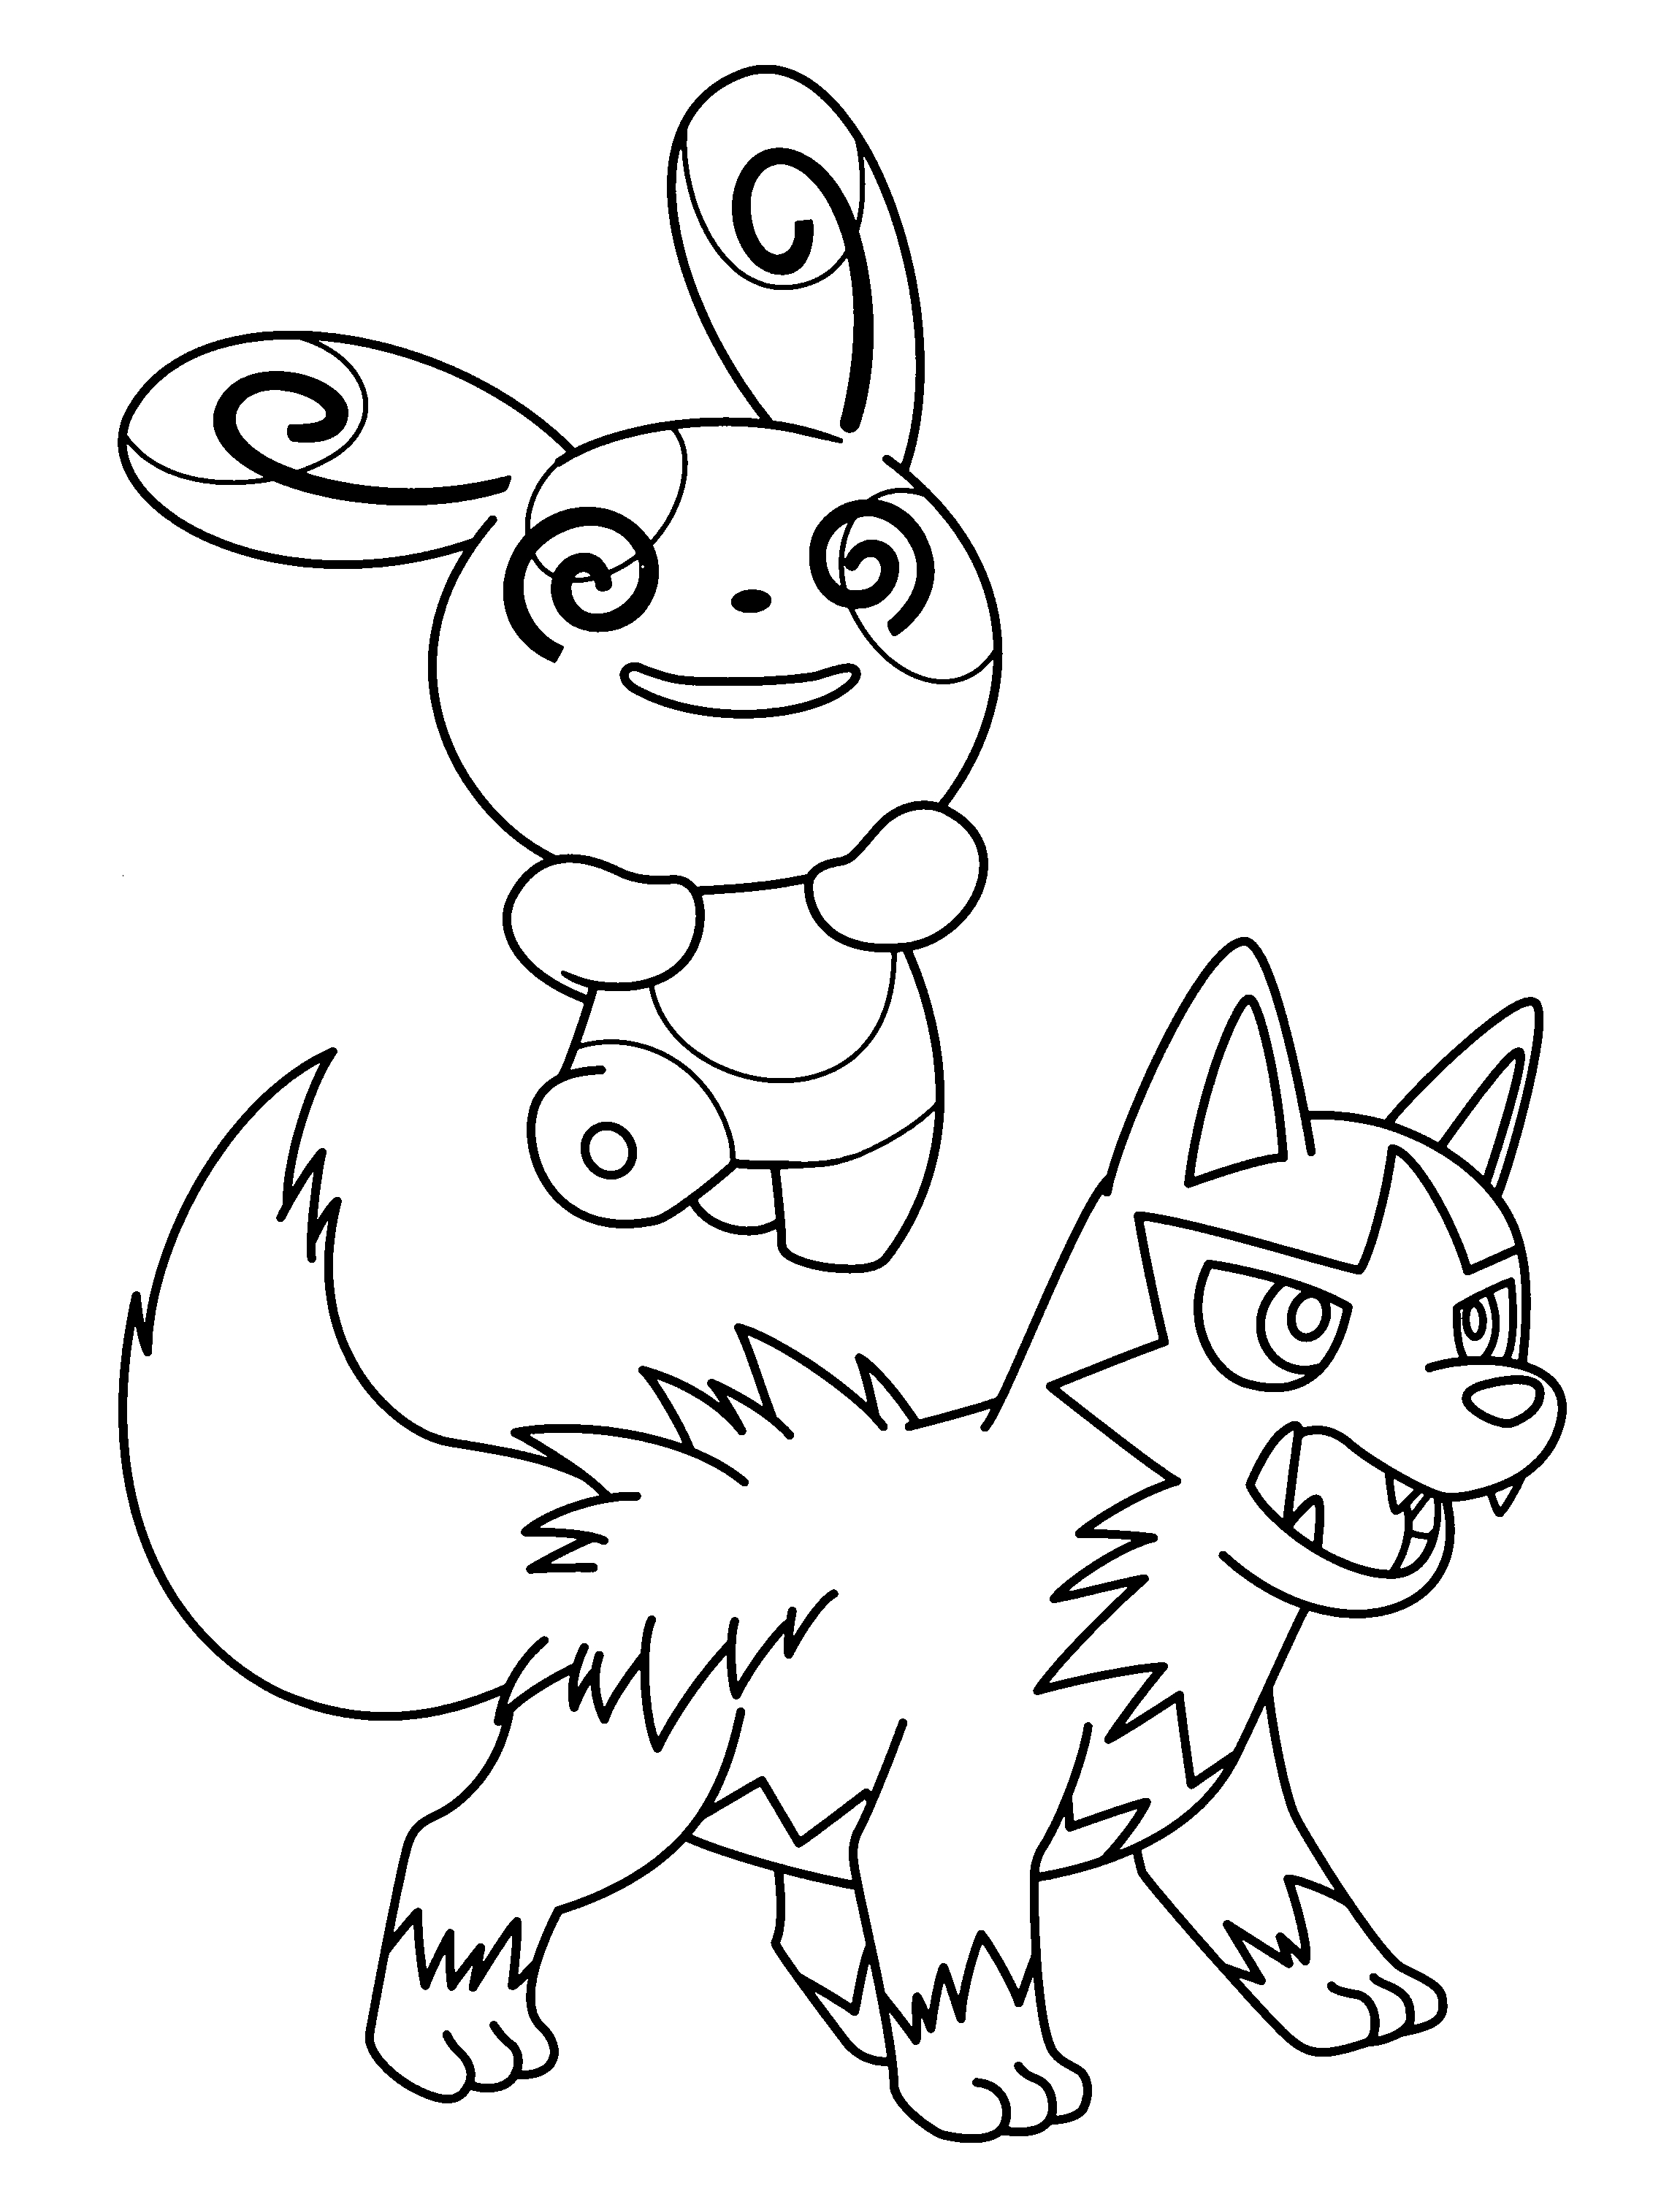 Poochyena Coloring Pages Coloring Page Tv Series Coloring Page Pokemon Advanced Picgifs